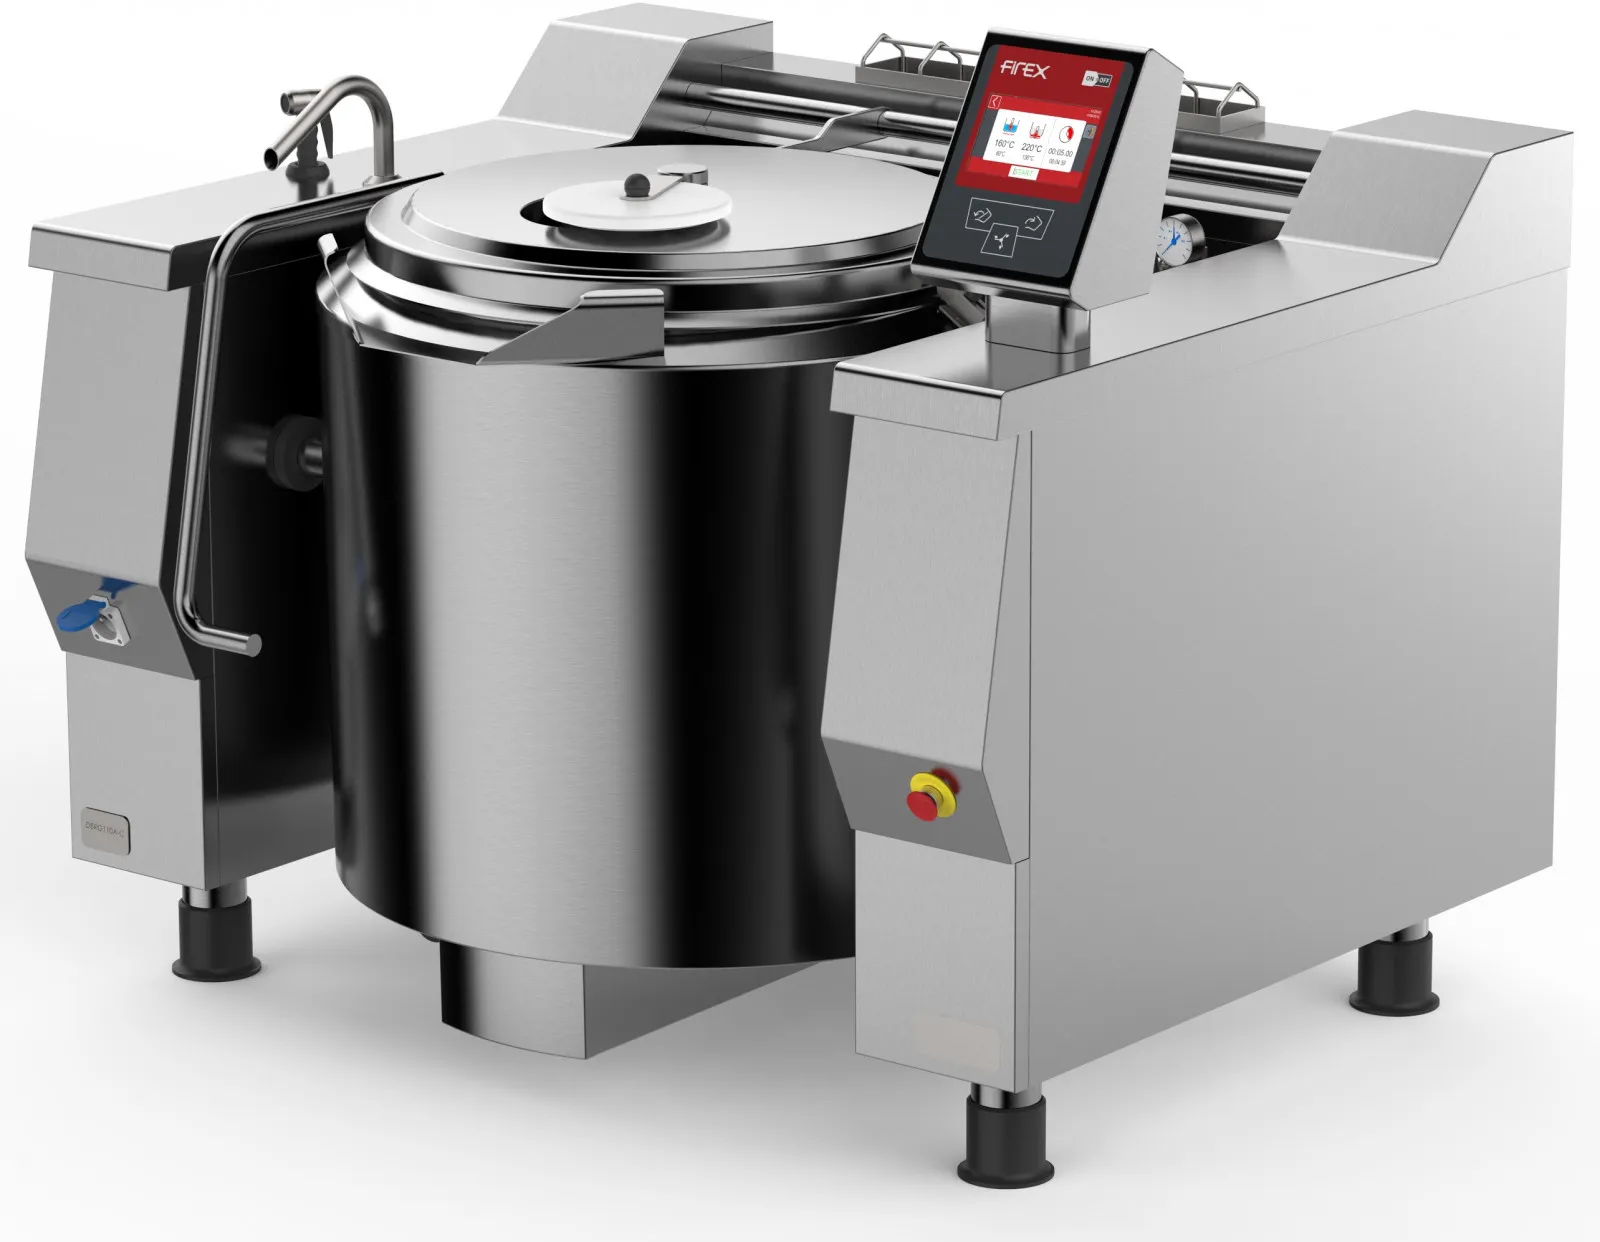 Firex Basket PRIG250M V1 242 Ltr Gas Indirect Heat Tilting Kettles With Stirrer With Touchscreen Programmable Controls